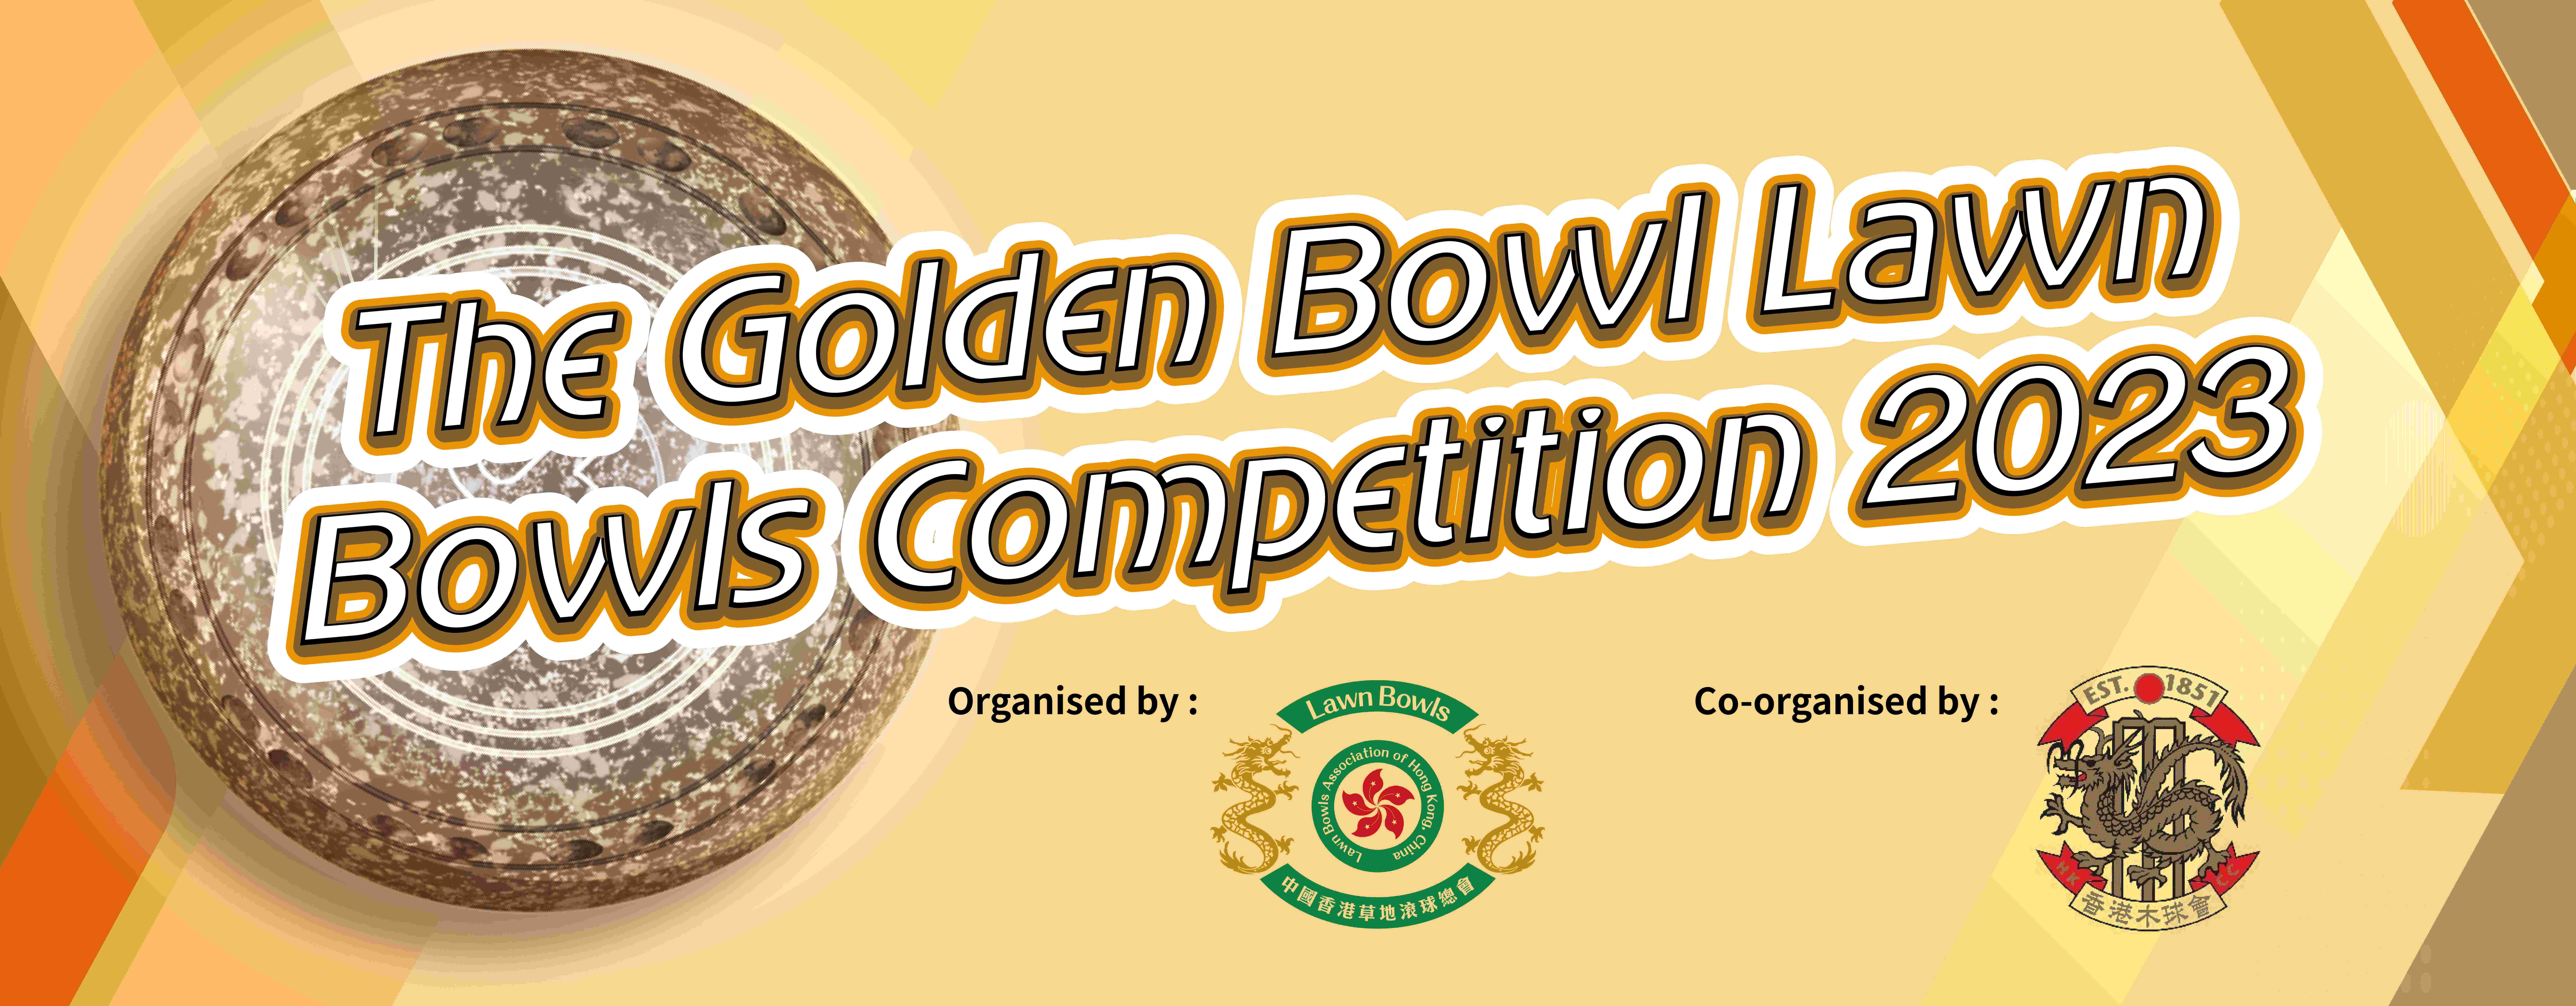 The Golden Bowl Lawn Bowl Competition 2023 (Updated on 25/10/23)